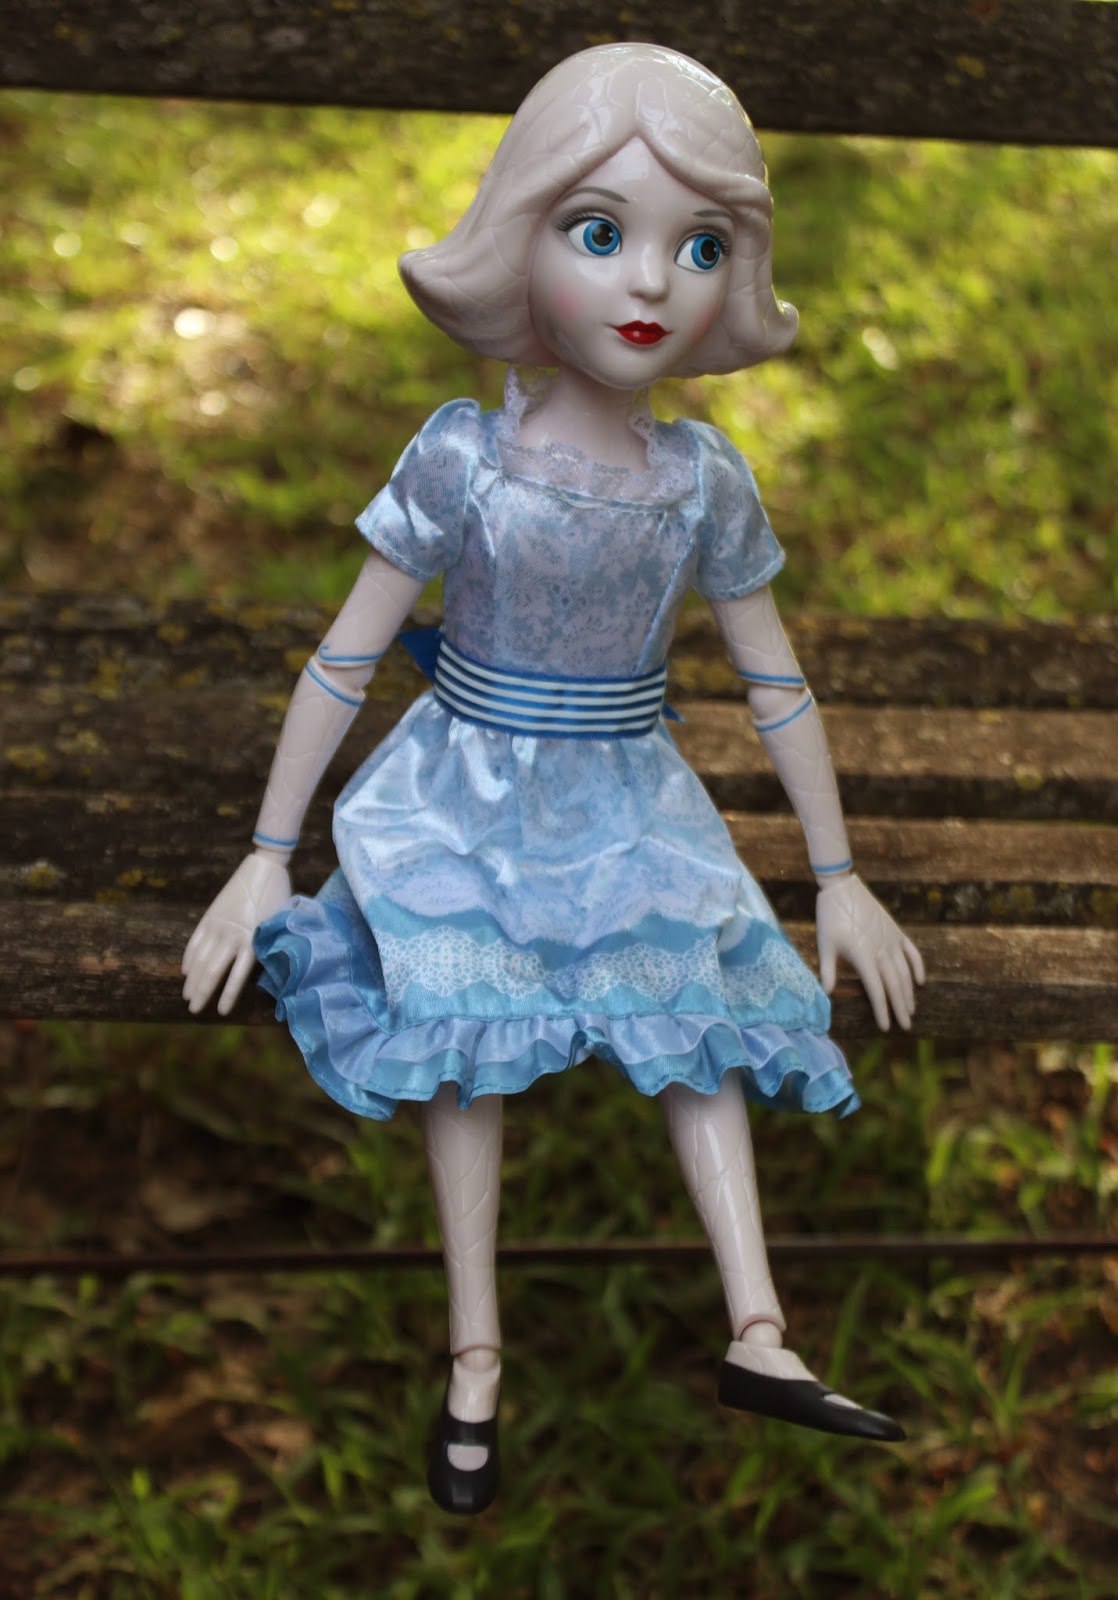 PLANET OF THE DOLLS: Living Dolls Week: Doll-A-Day 180: The China Doll